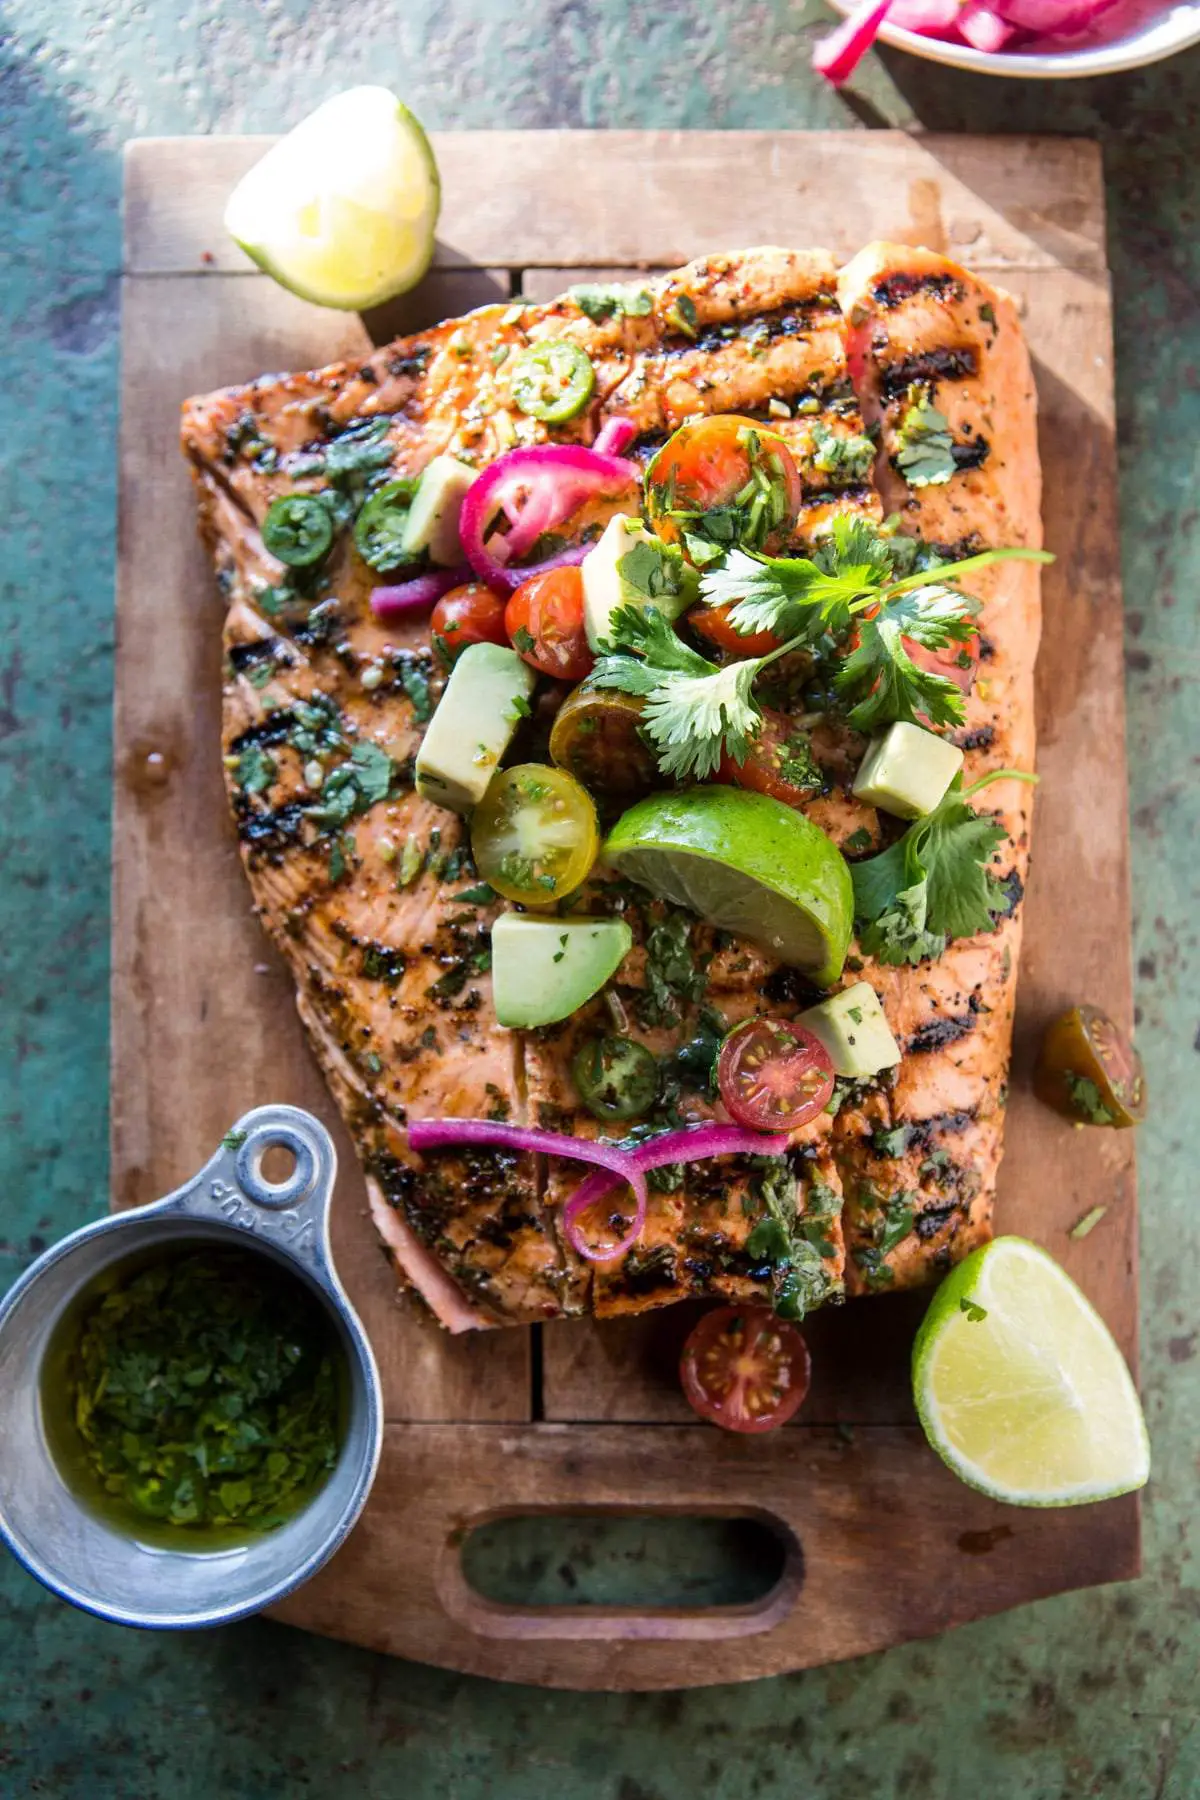 20+ Best Dinner Party Food Ideas - Easy Dinner Party Recipes, Cuban Grilled Salmon with Tomato-Avocado Salsa